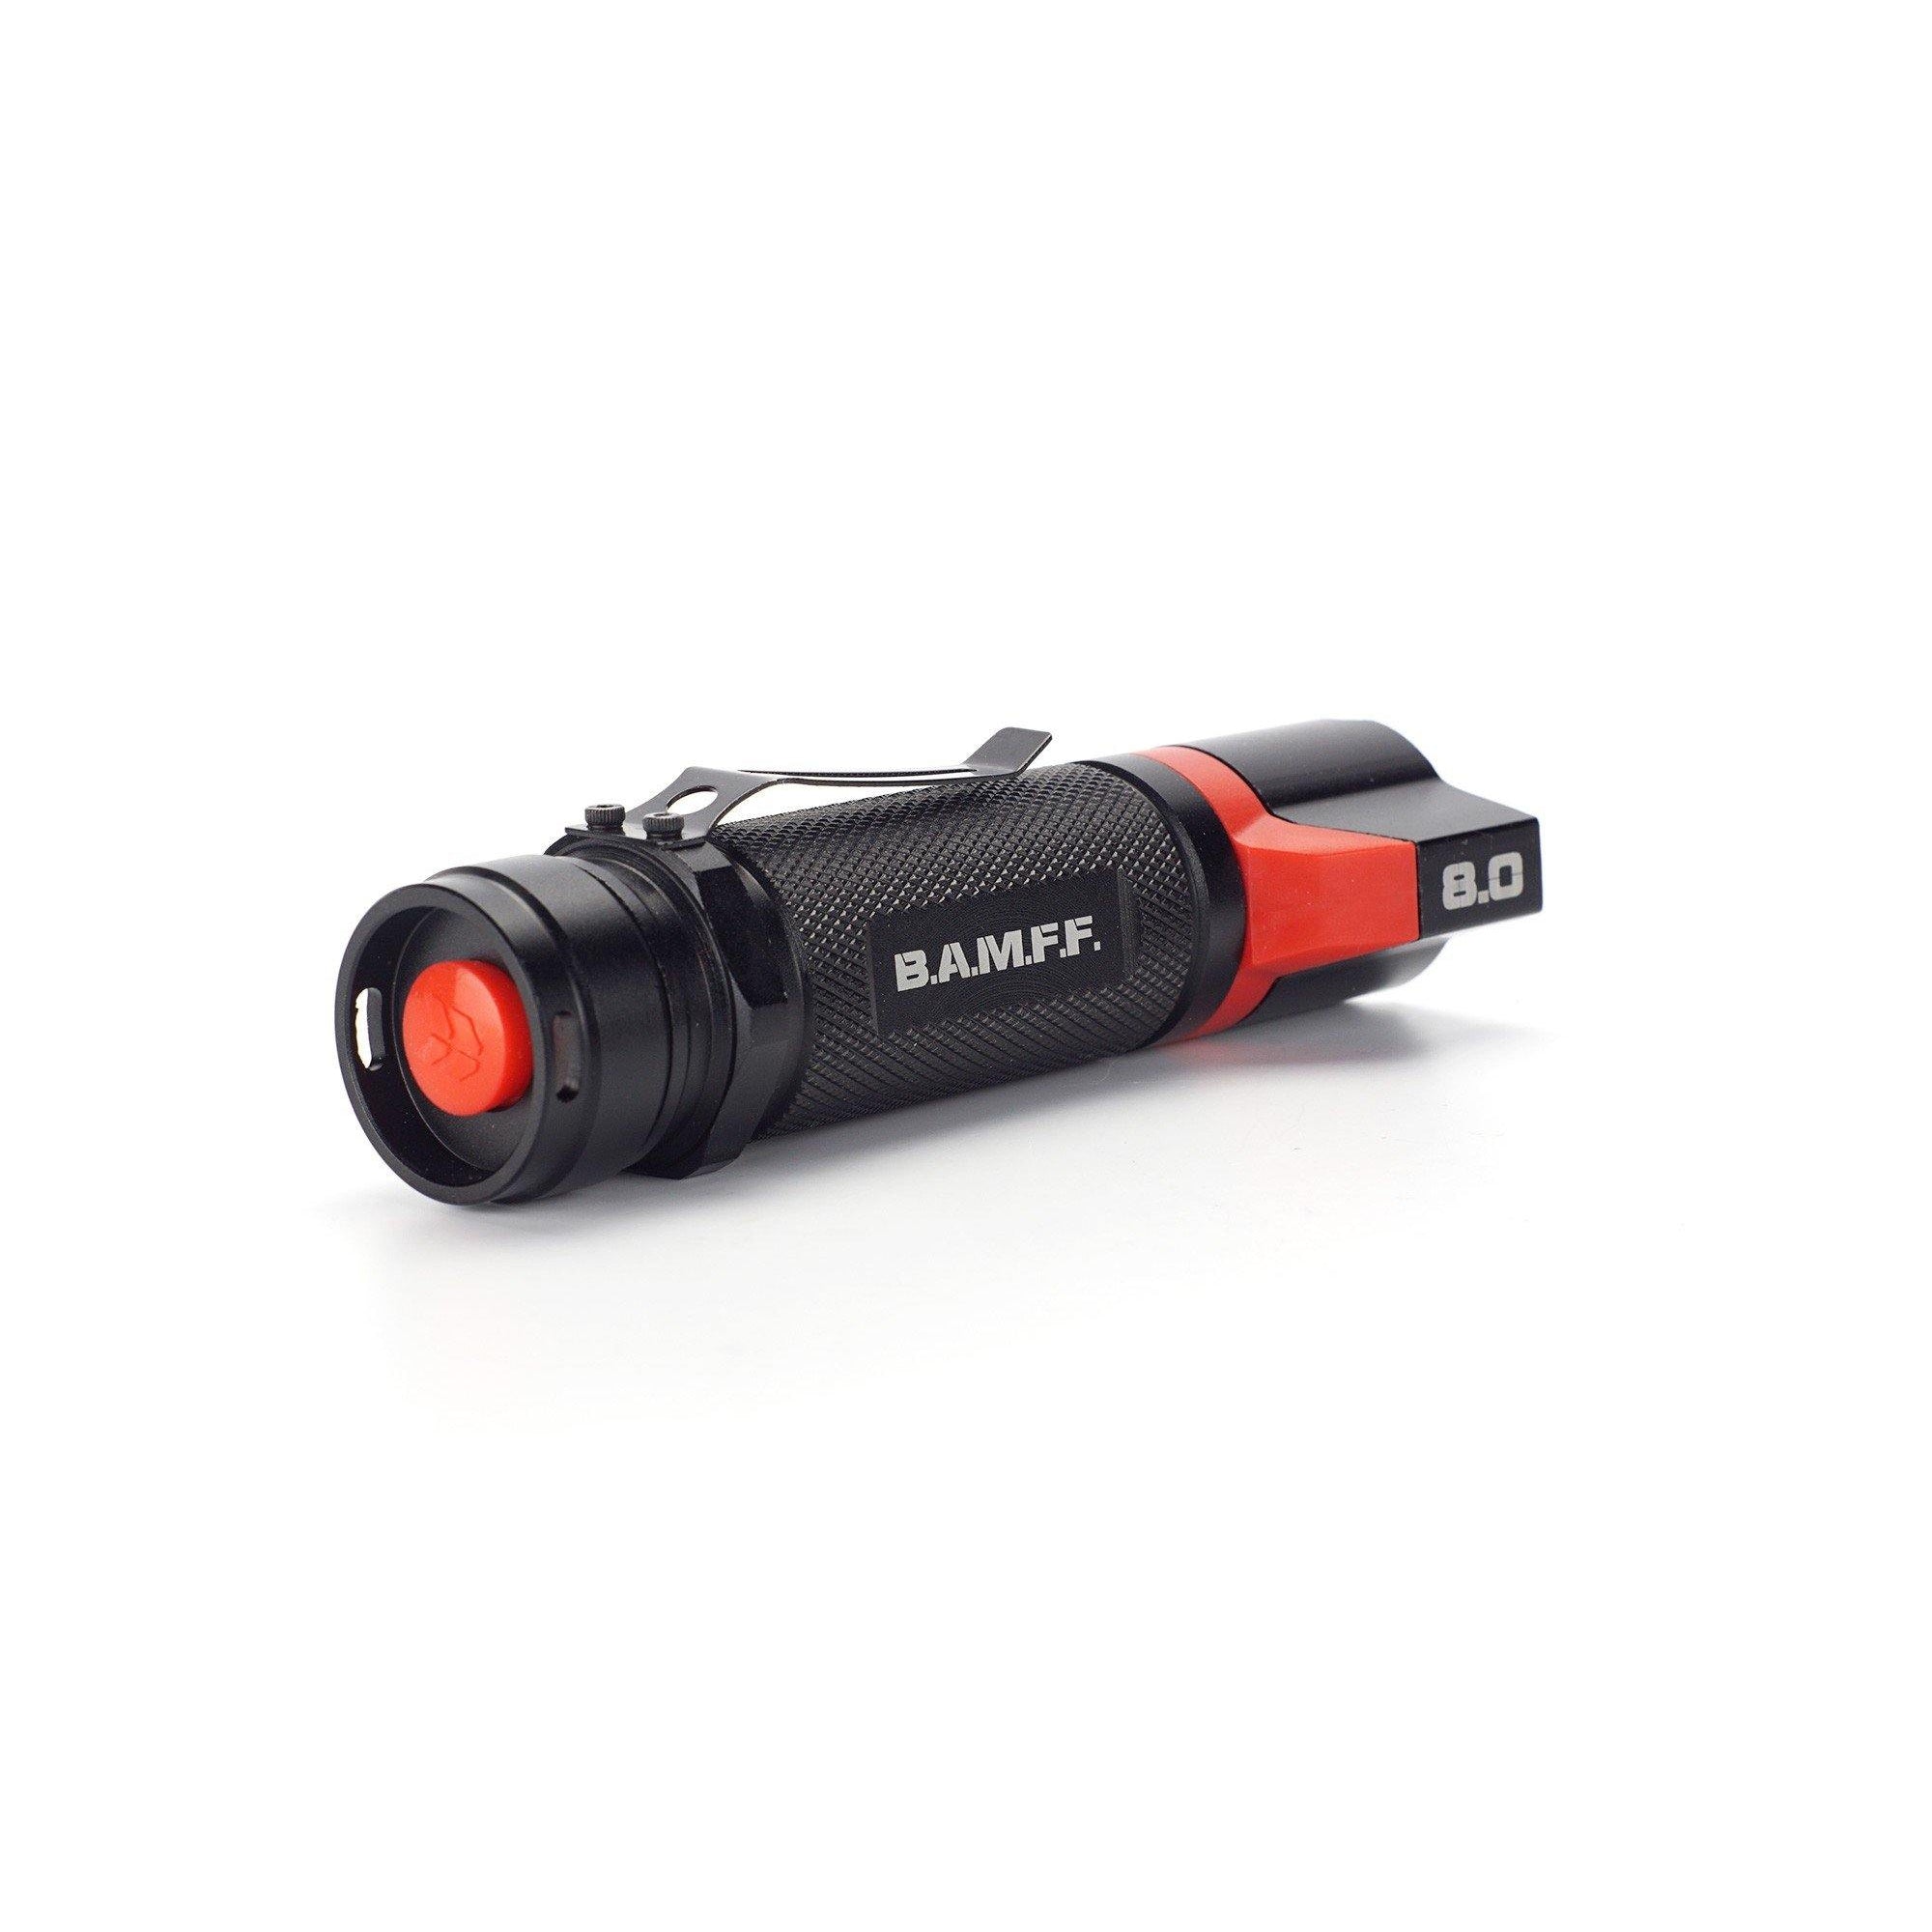 BAMFF 8.0 dual LED flashlight long distance and area lighting in one | STKR Concepts - striker flashlight